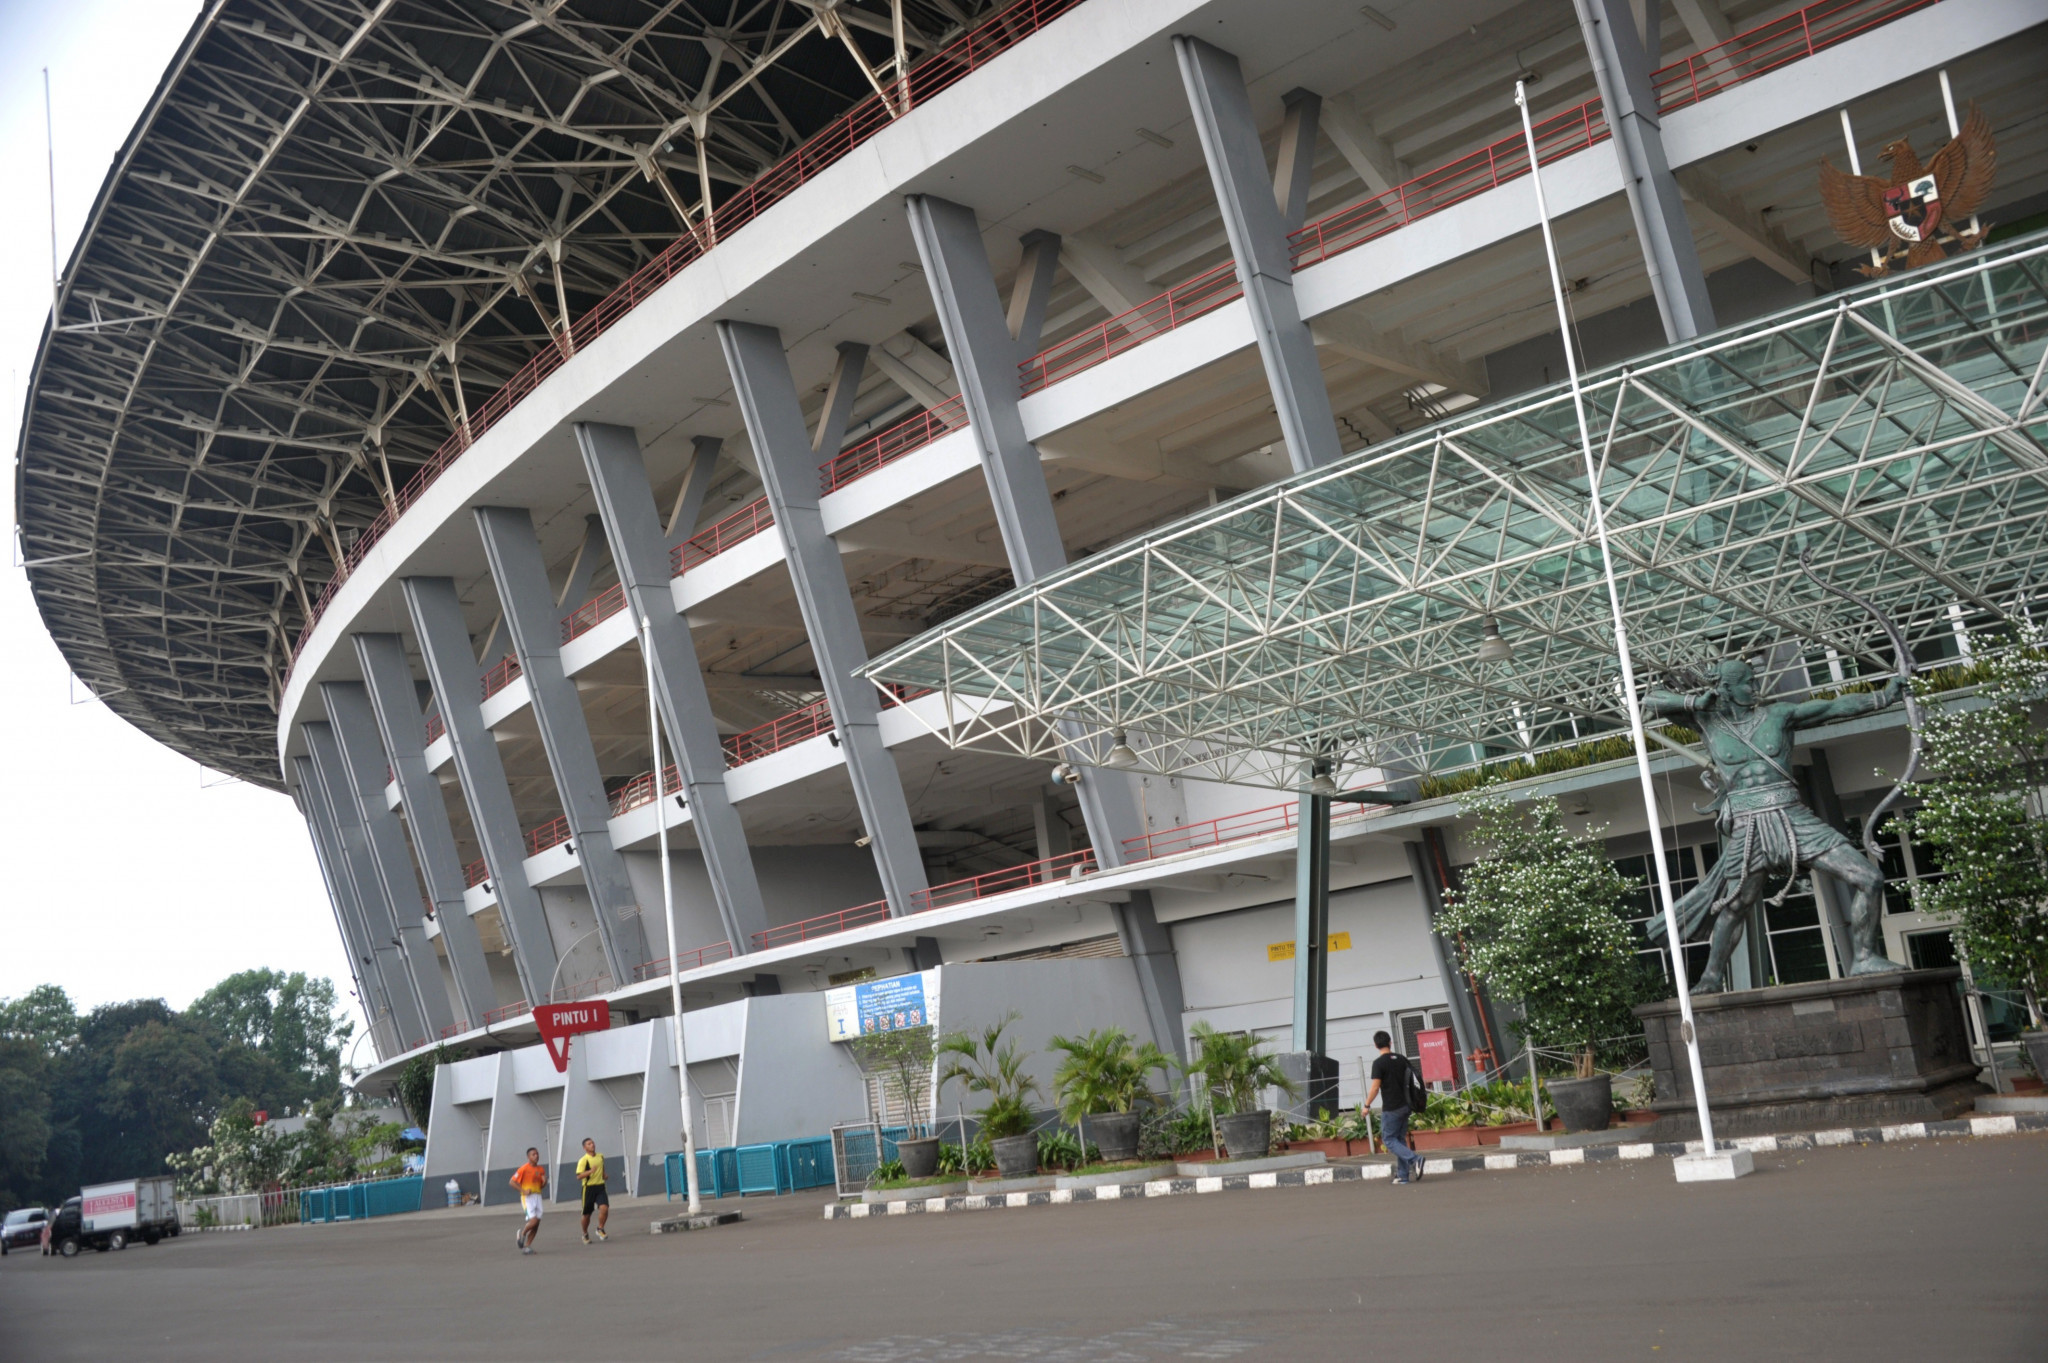 GANEFO was held at the showpiece Gelora Bung Karno stadium built for the 1962 Asian Games and later renovated for use in 2018 ©Getty Images